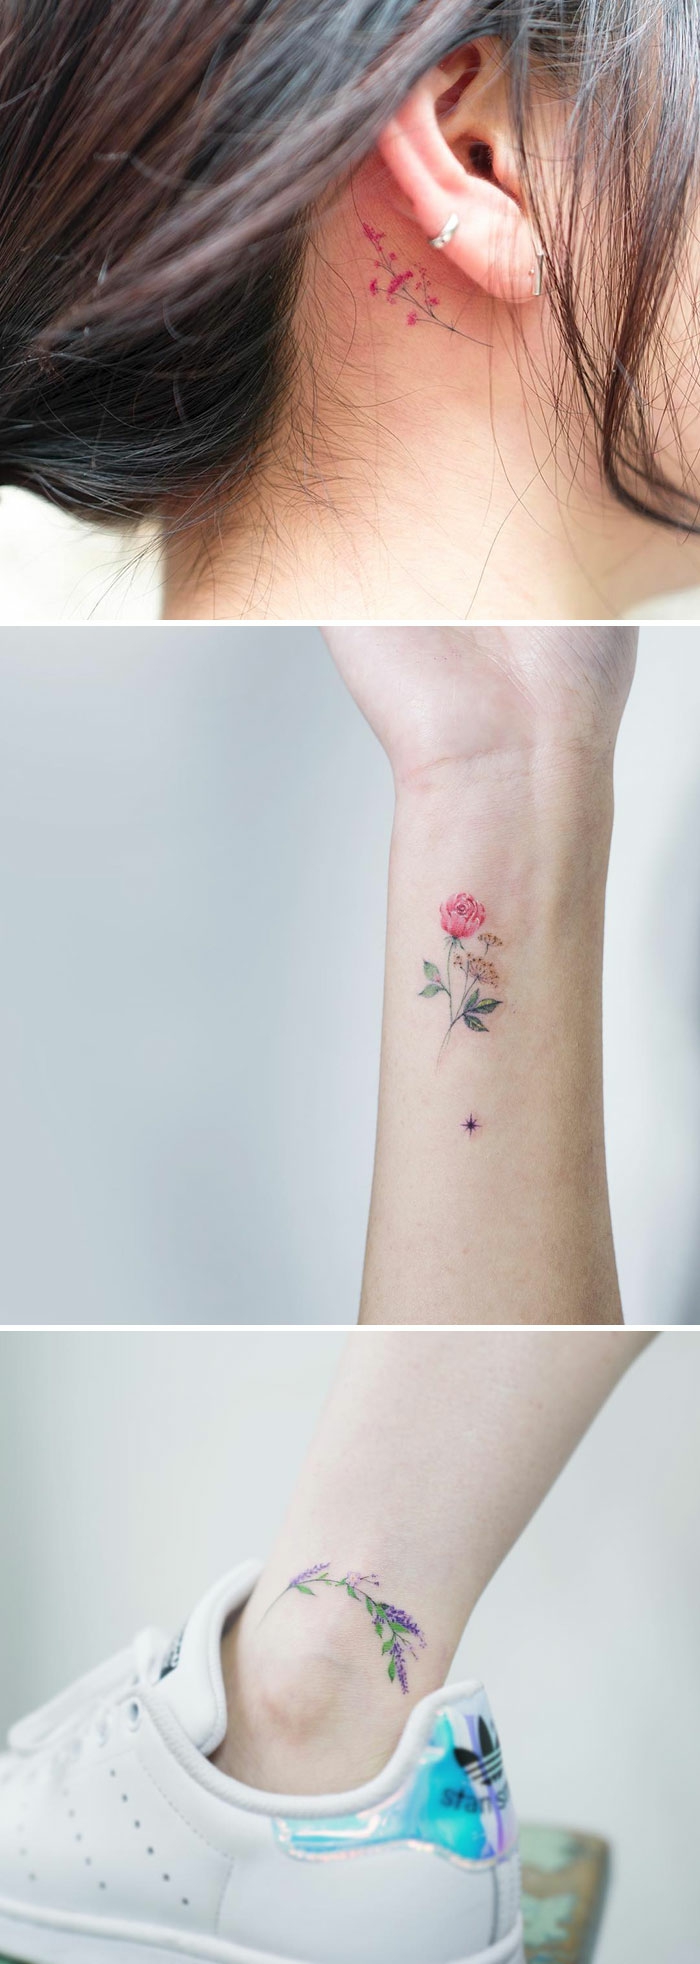 Custom SG Flower Flash Tattoos for Divine beauty and enchantment